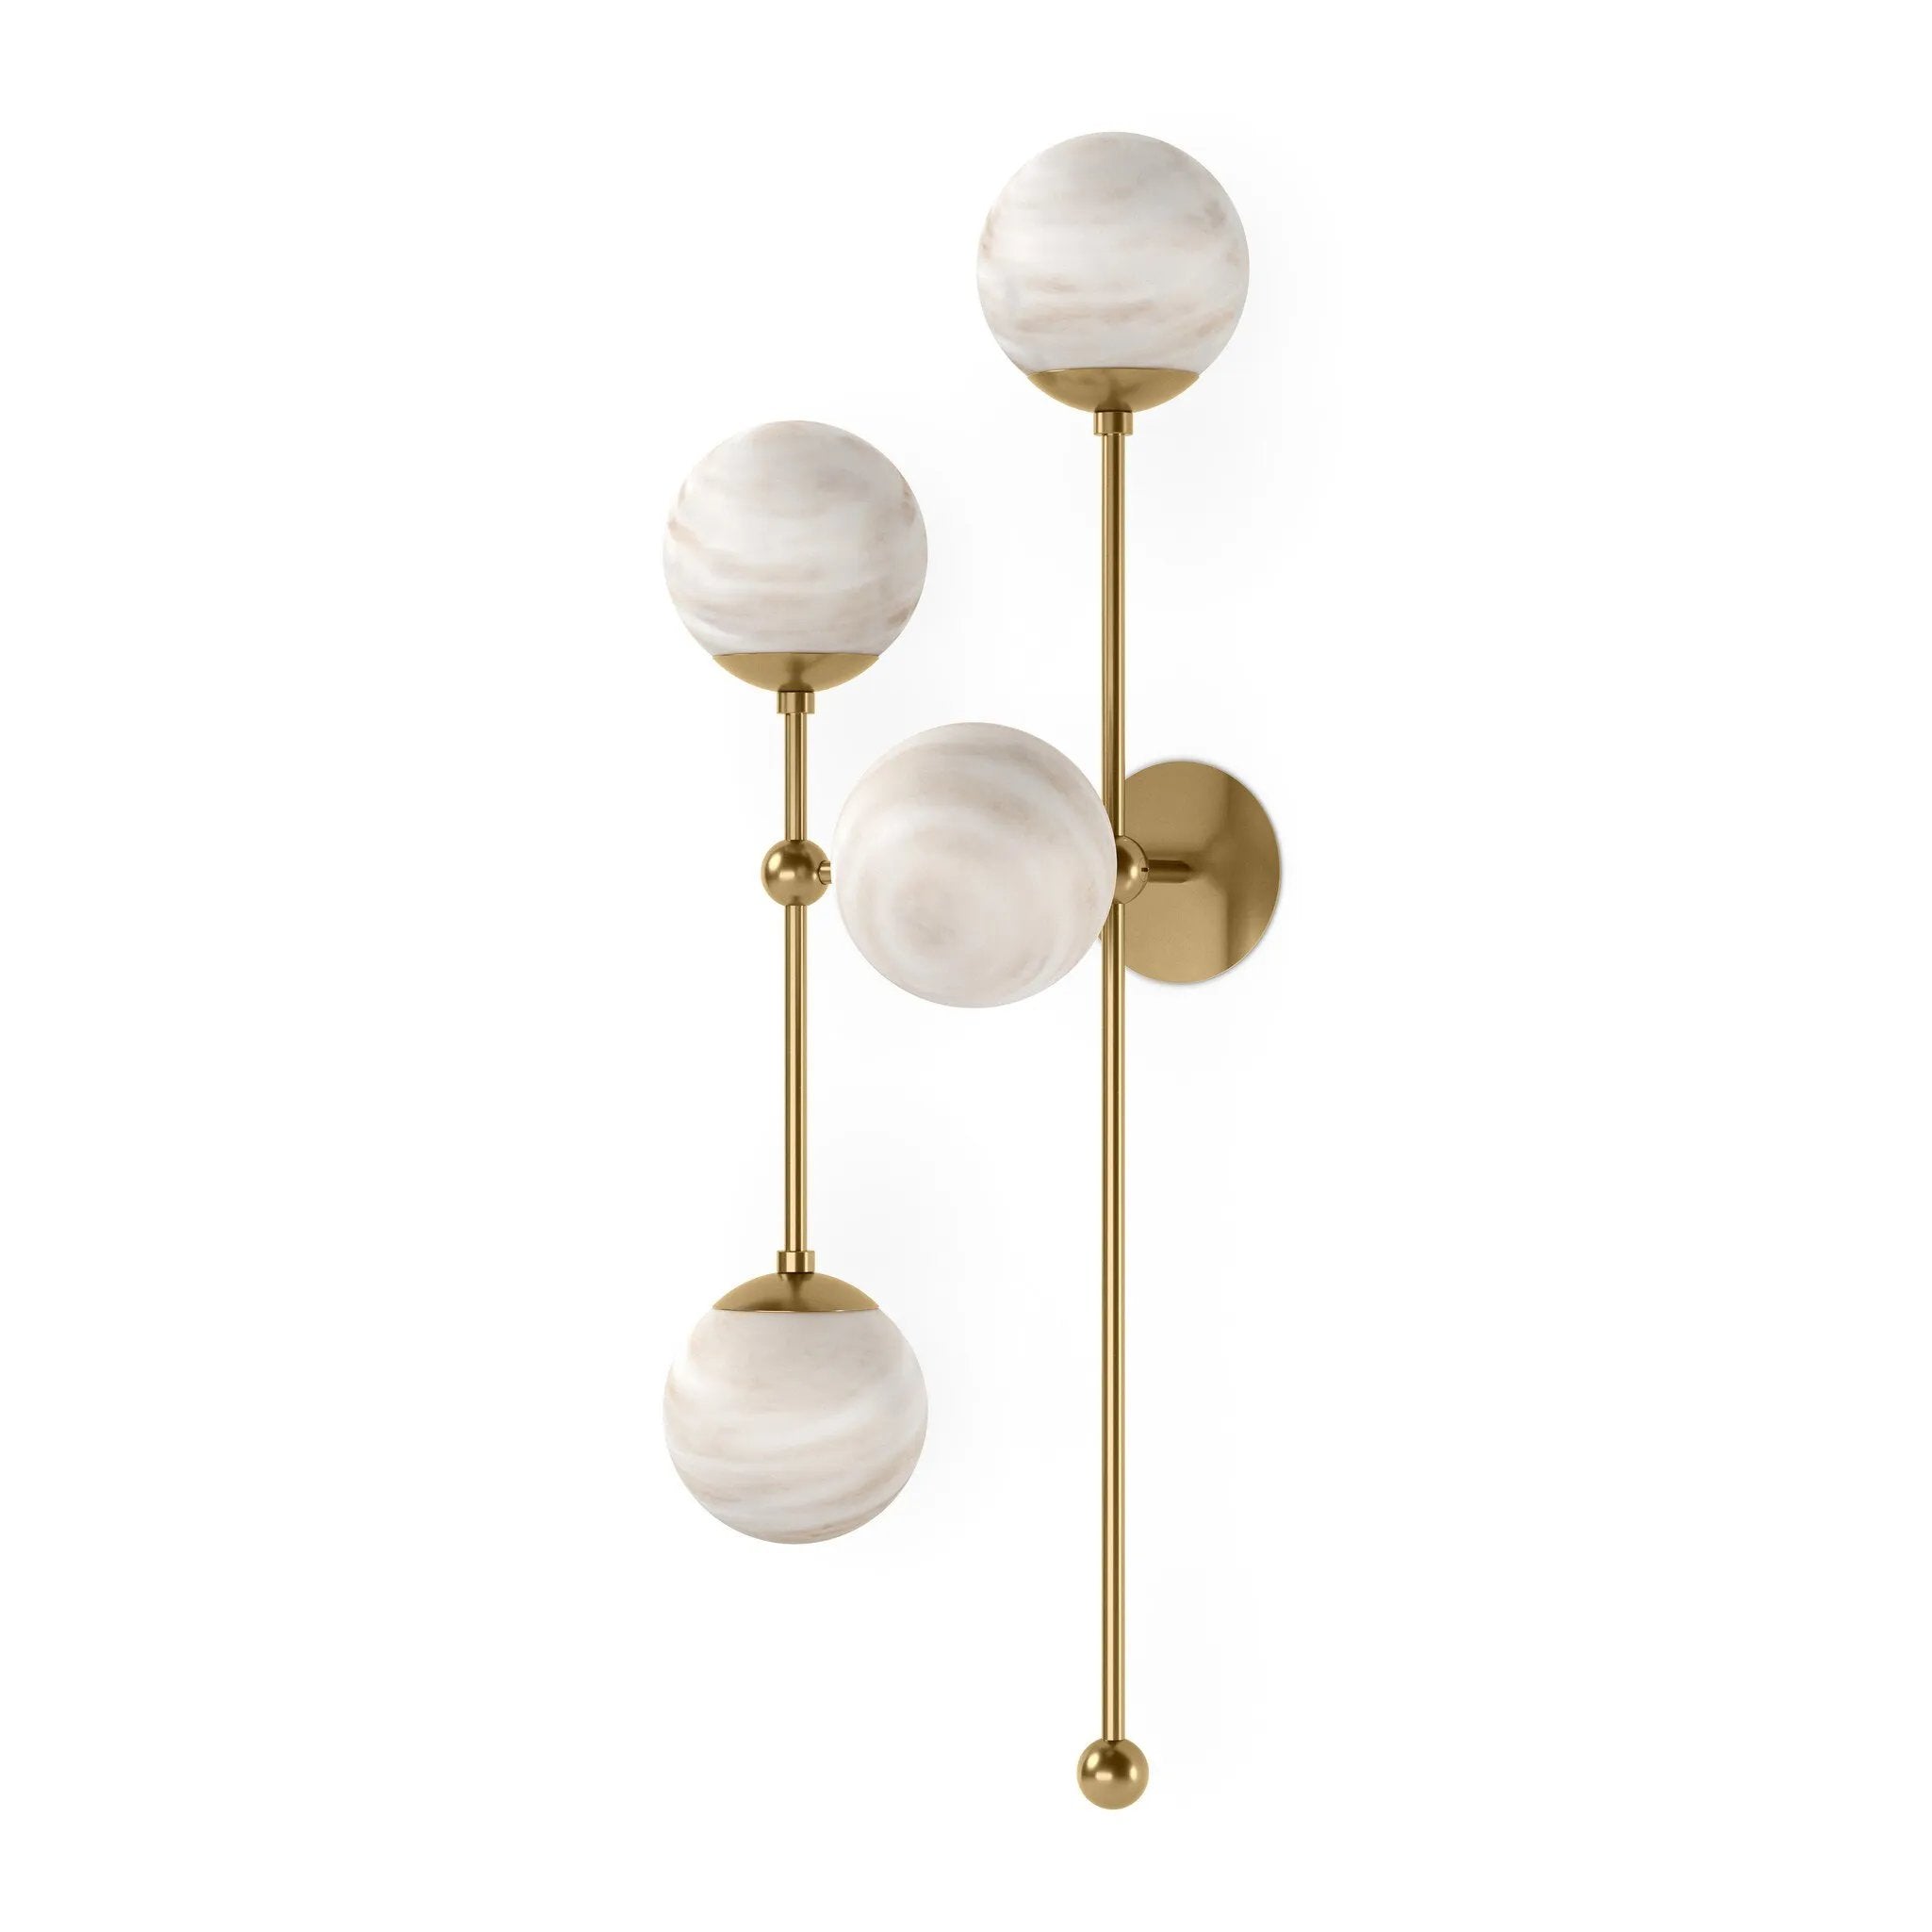 Marbled glass spheres seem to extend and reach across smooth brass rods. Each globe is individually blown, shaped and sculpted by hand through a one-hour process. Brass and glass are 98% recyclable. Designed and sustainably made in Poland by Schwung.Overall Dimensions13.75"w x 13.00"d x 36.25"hFull Details &amp; SpecificationsTear Shee Amethyst Home provides interior design, new home construction design consulting, vintage area rugs, and lighting in the Dallas metro area.